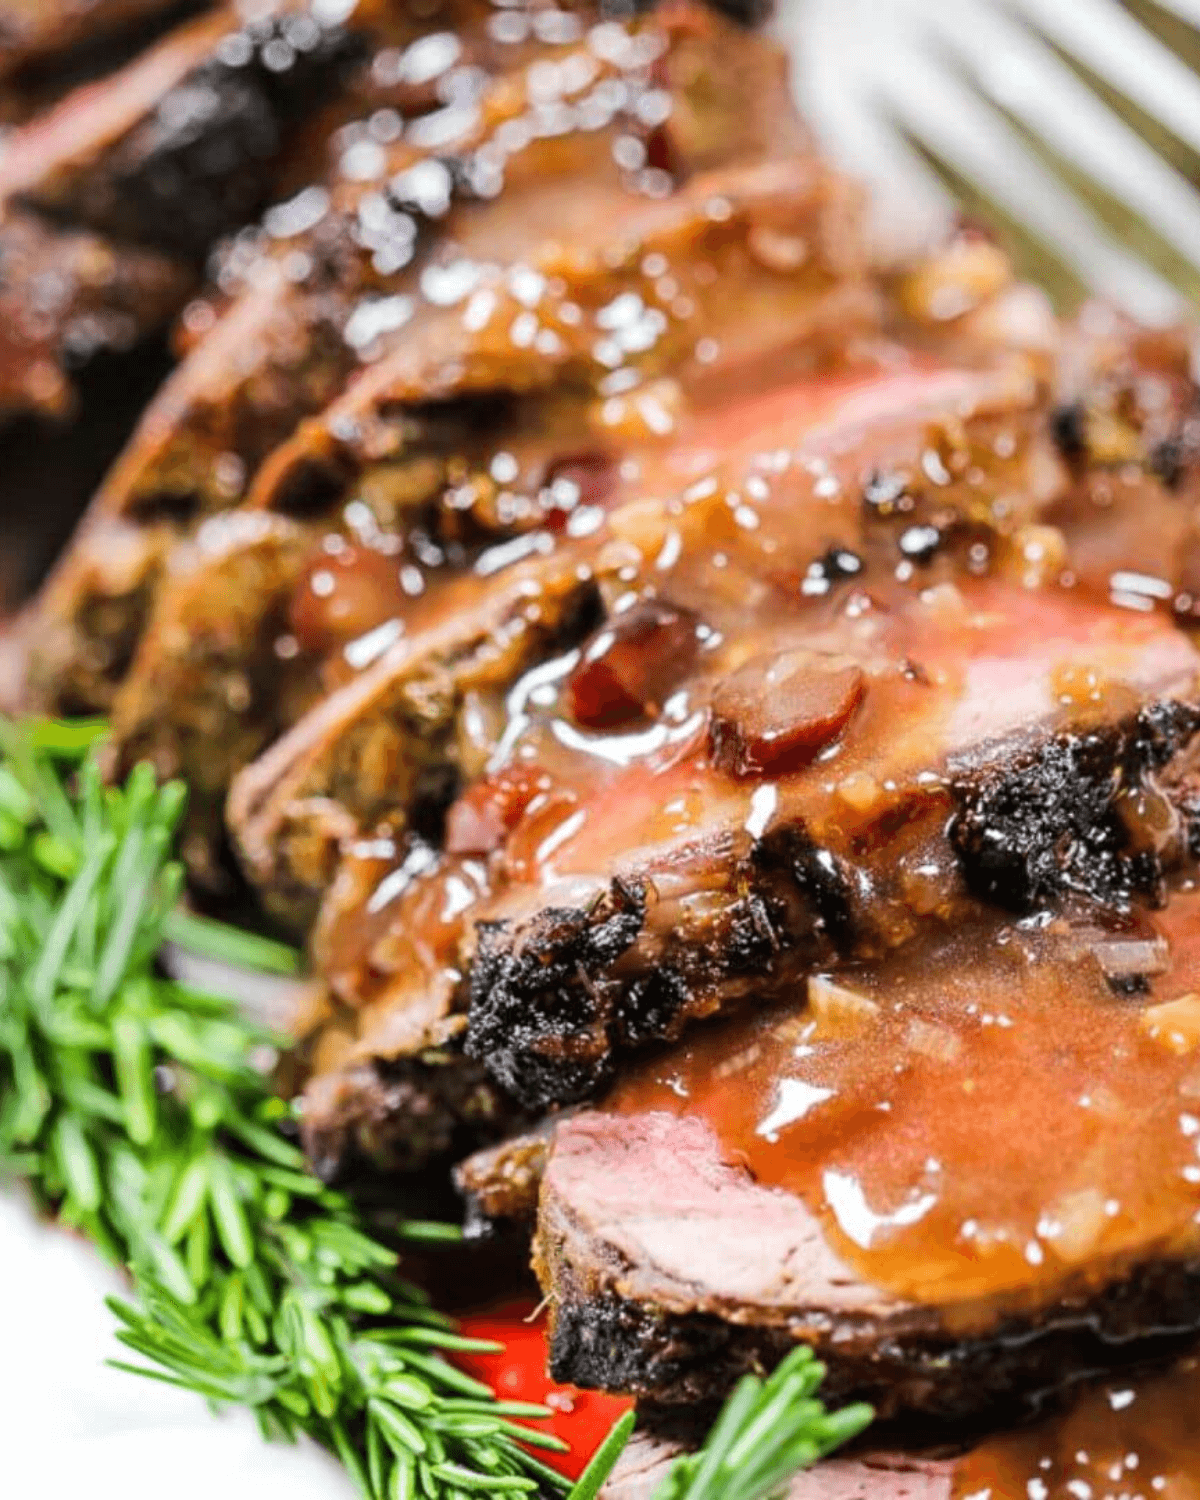 A slow roasted beef tenderloin with port wine sauce.